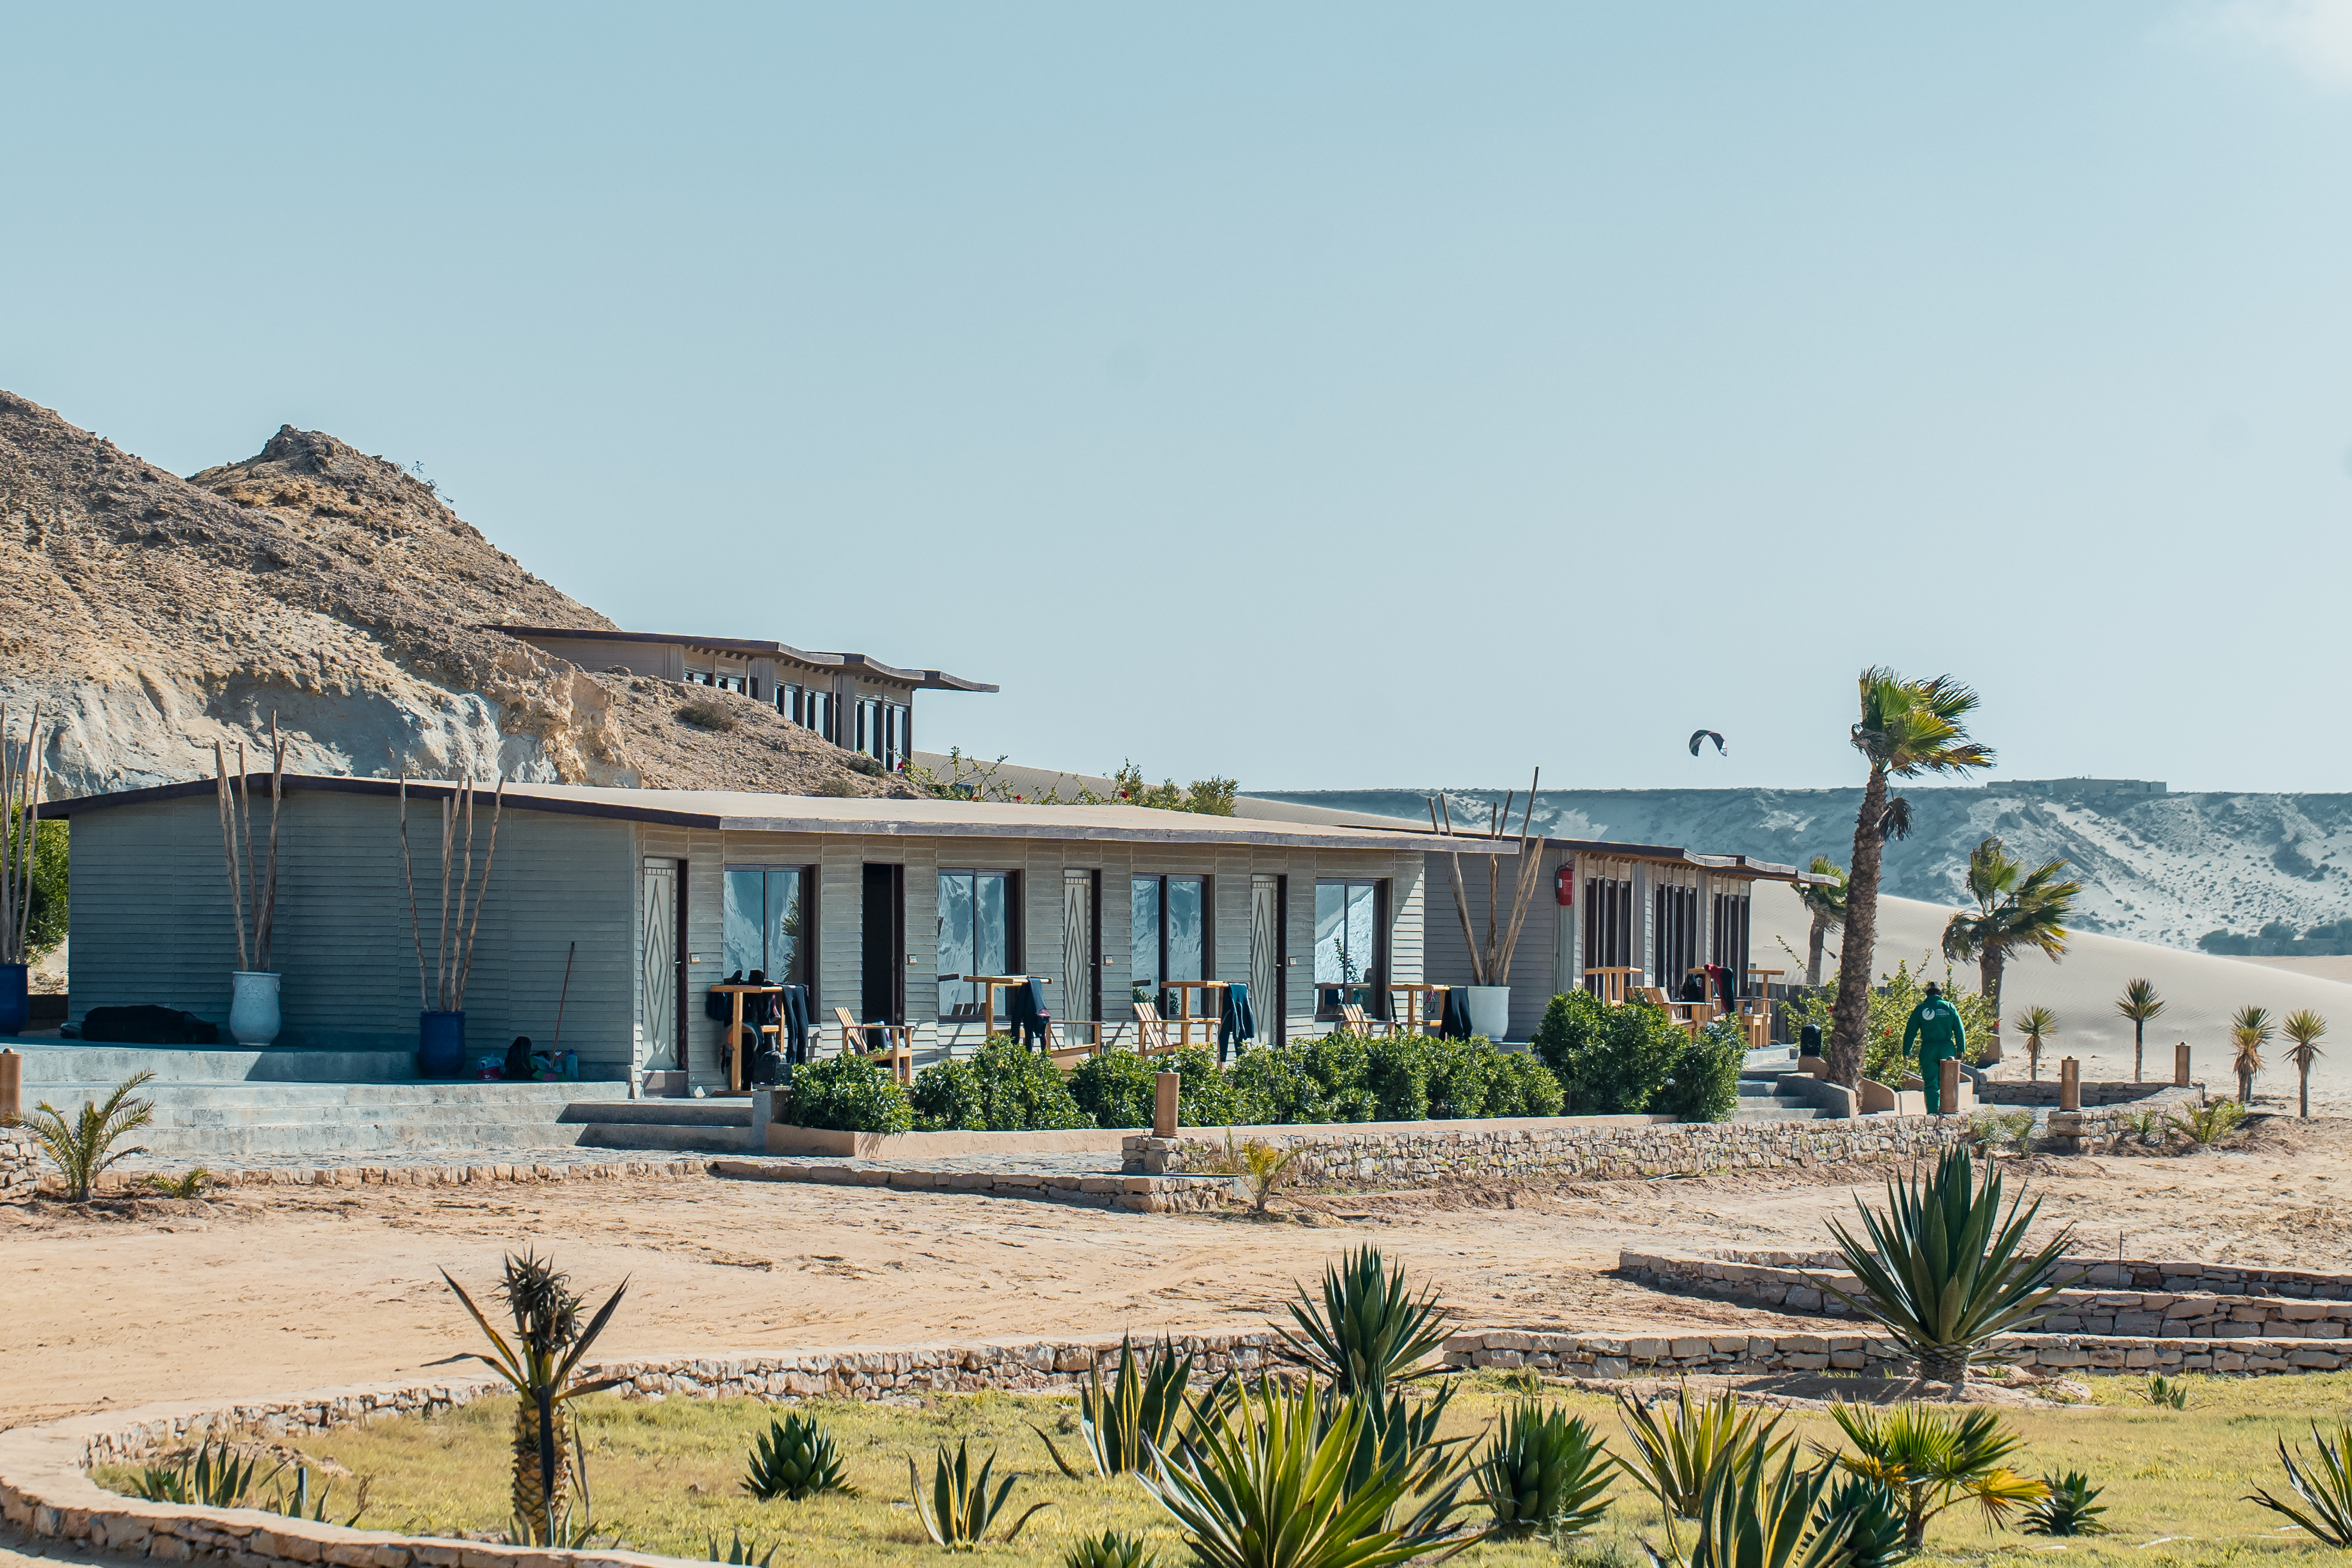 View of the Dakhla Evasion's Bungalows